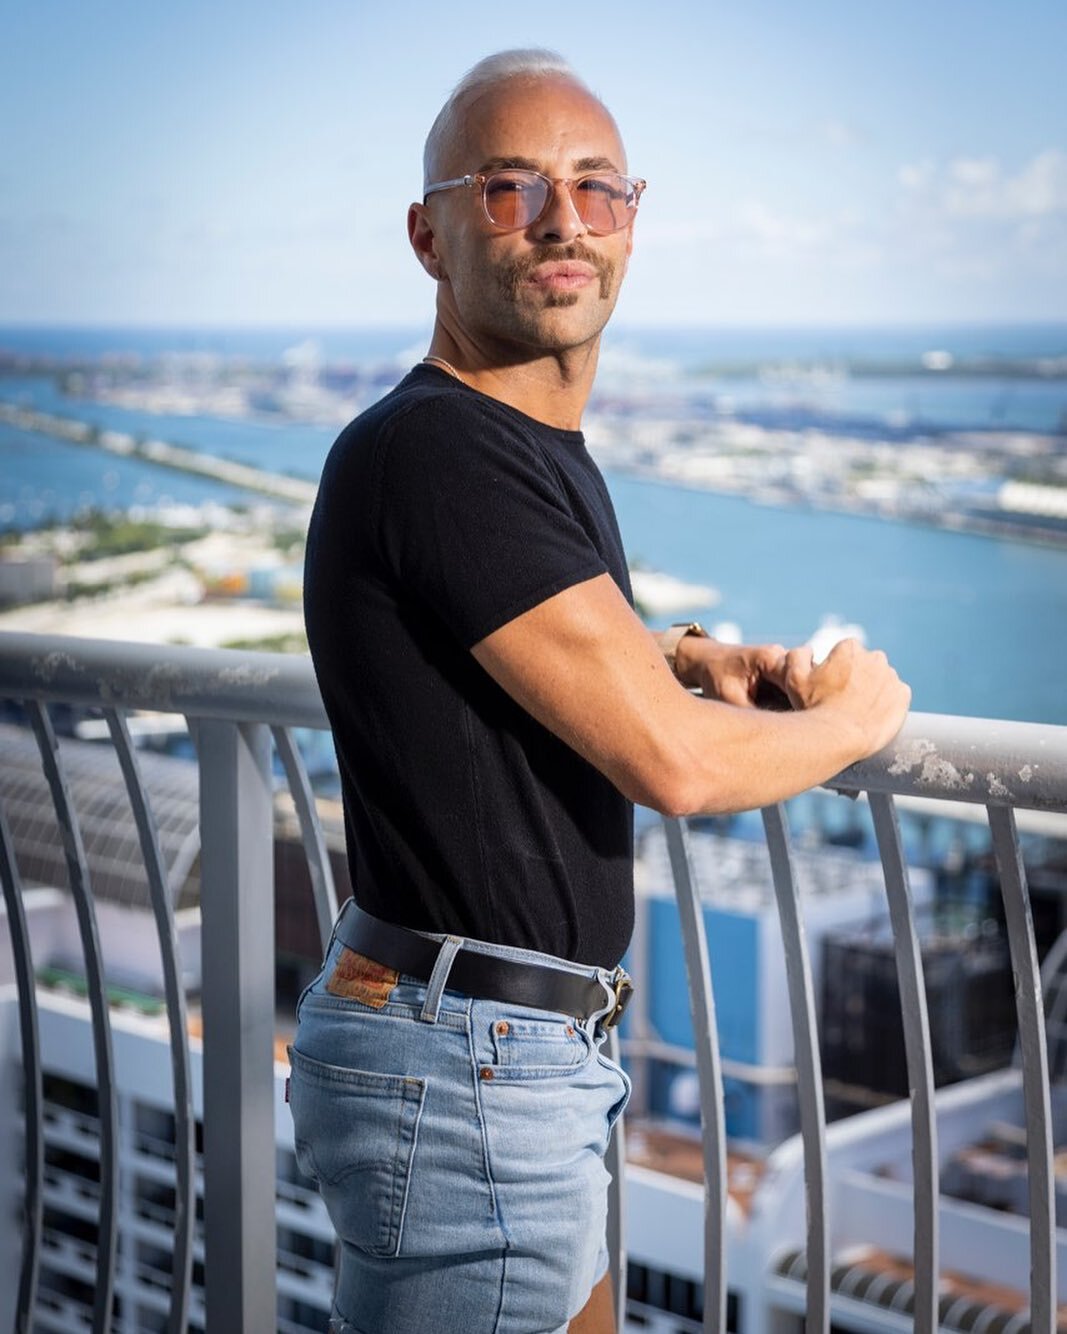 The unexpected moments are the ones worth most savoring 🫶 thank you @schneiderphotofilm for capturing this very reflective moment in time.

#miami #miamilife #views #gaymiami #miamiinfluencer #gayguy #gay #gayinfluencer #reflection #photooftheday